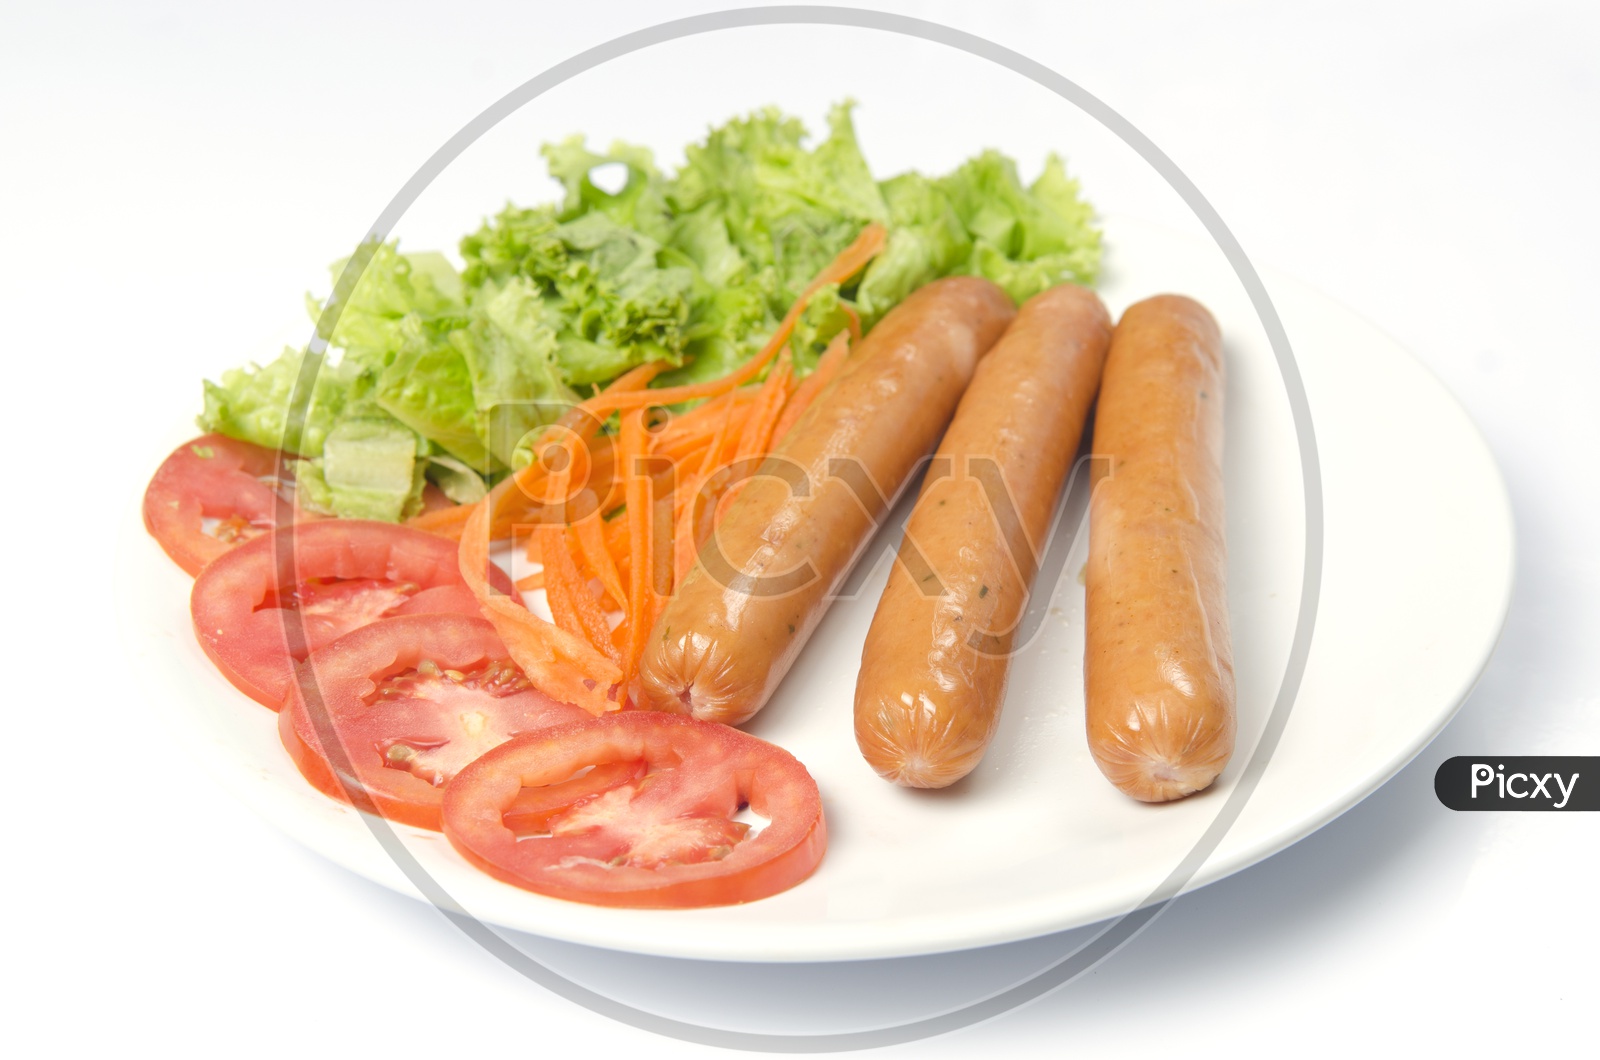 sausage and hot dogs garnished with vegetables isolated on white background